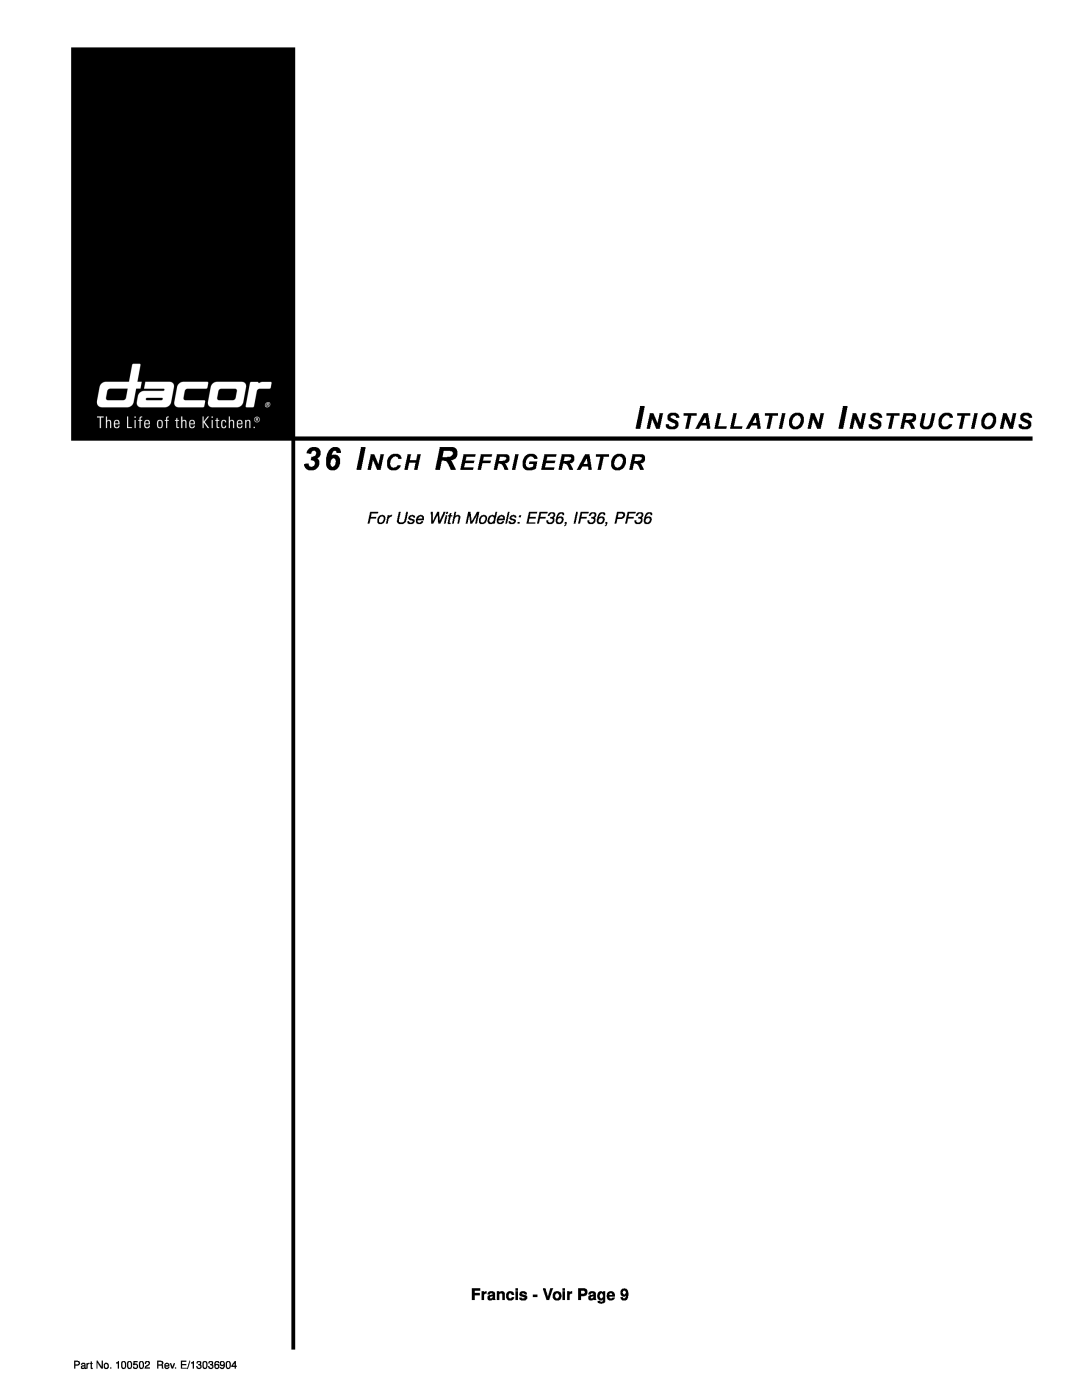 Dacor manual Install ation Instructions 36Inch Refriger ator, For Use With Models EF36, IF36, PF36, Francis - Voir Page 